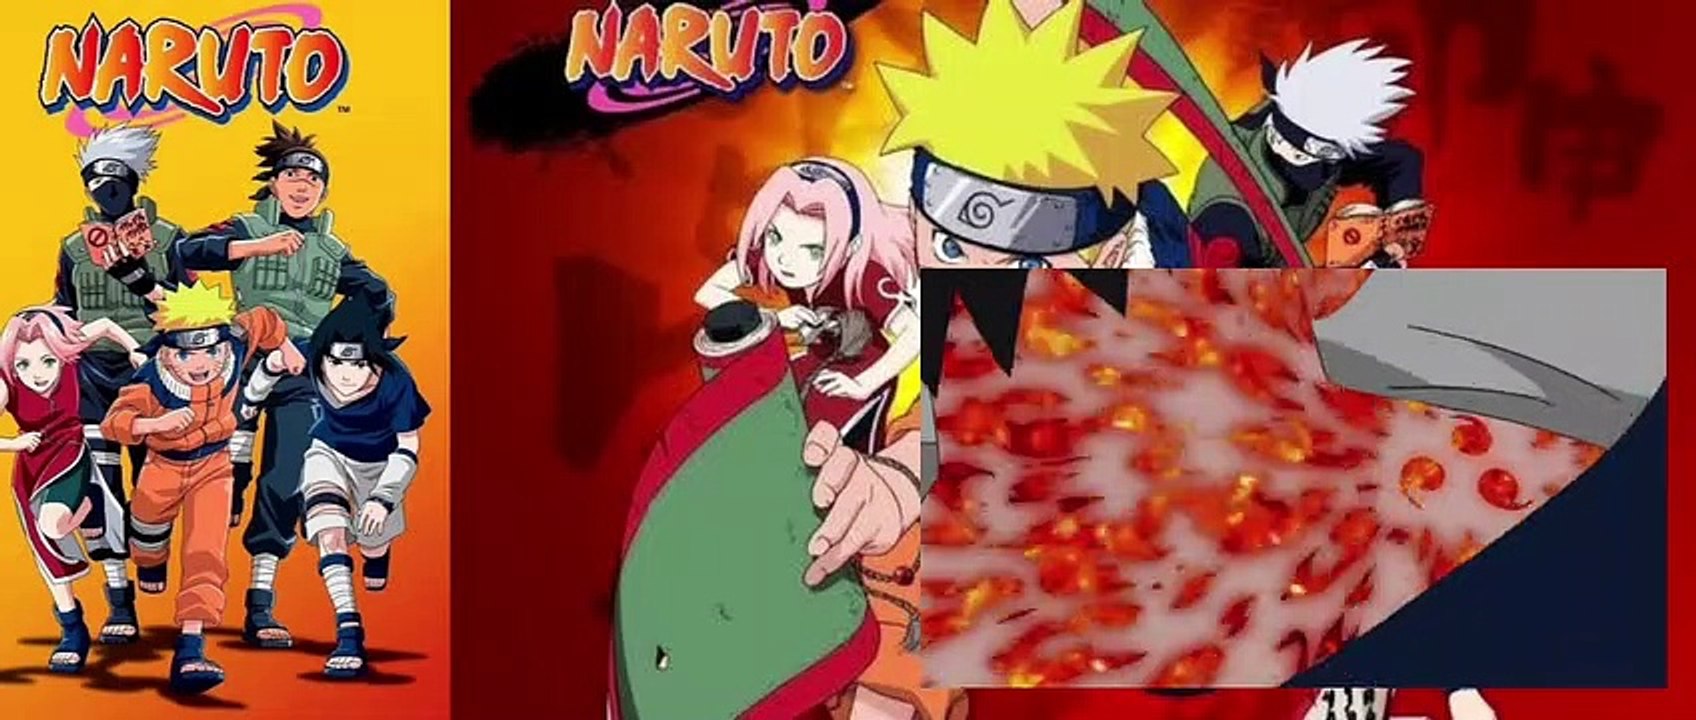 Naruto Shippuden Generations Mugen - All Characters - video Dailymotion